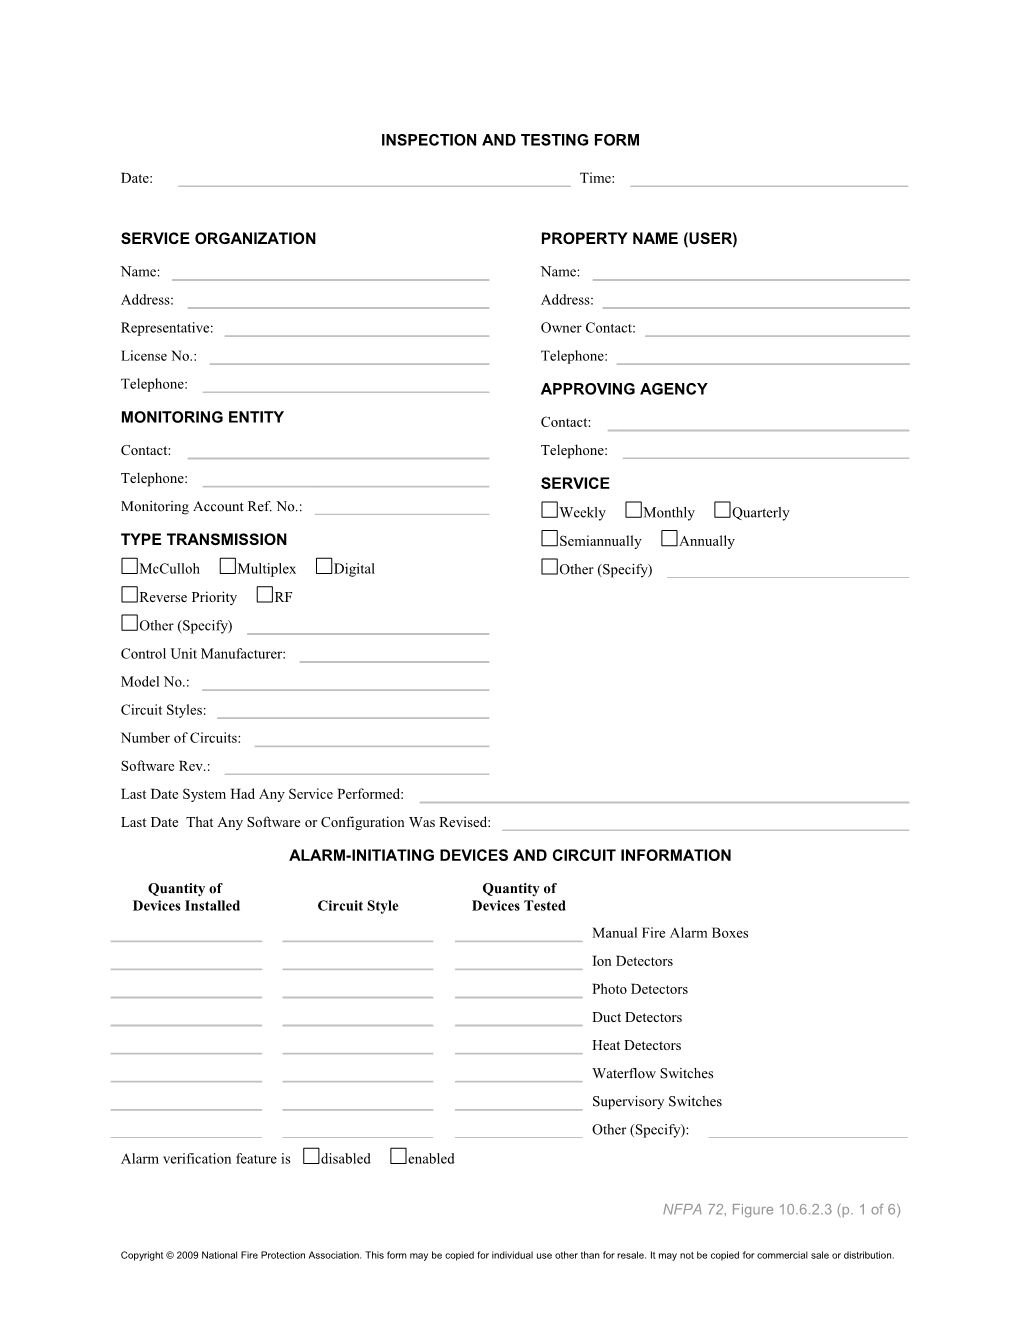 Inspection and Testing Form